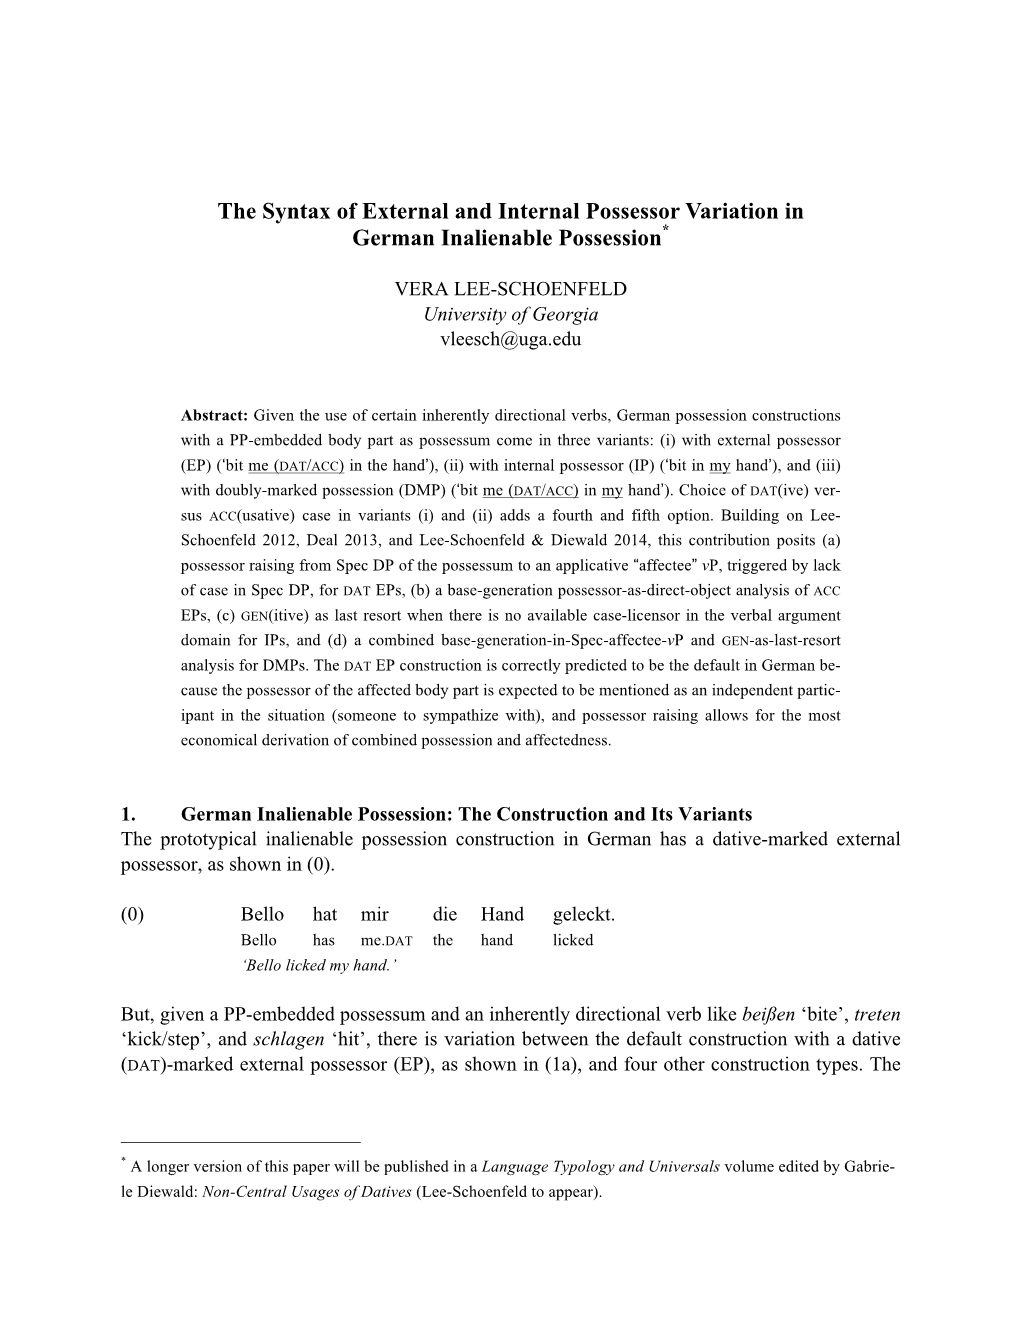 The Syntax of External and Internal Possessor Variation in German Inalienable Possession*